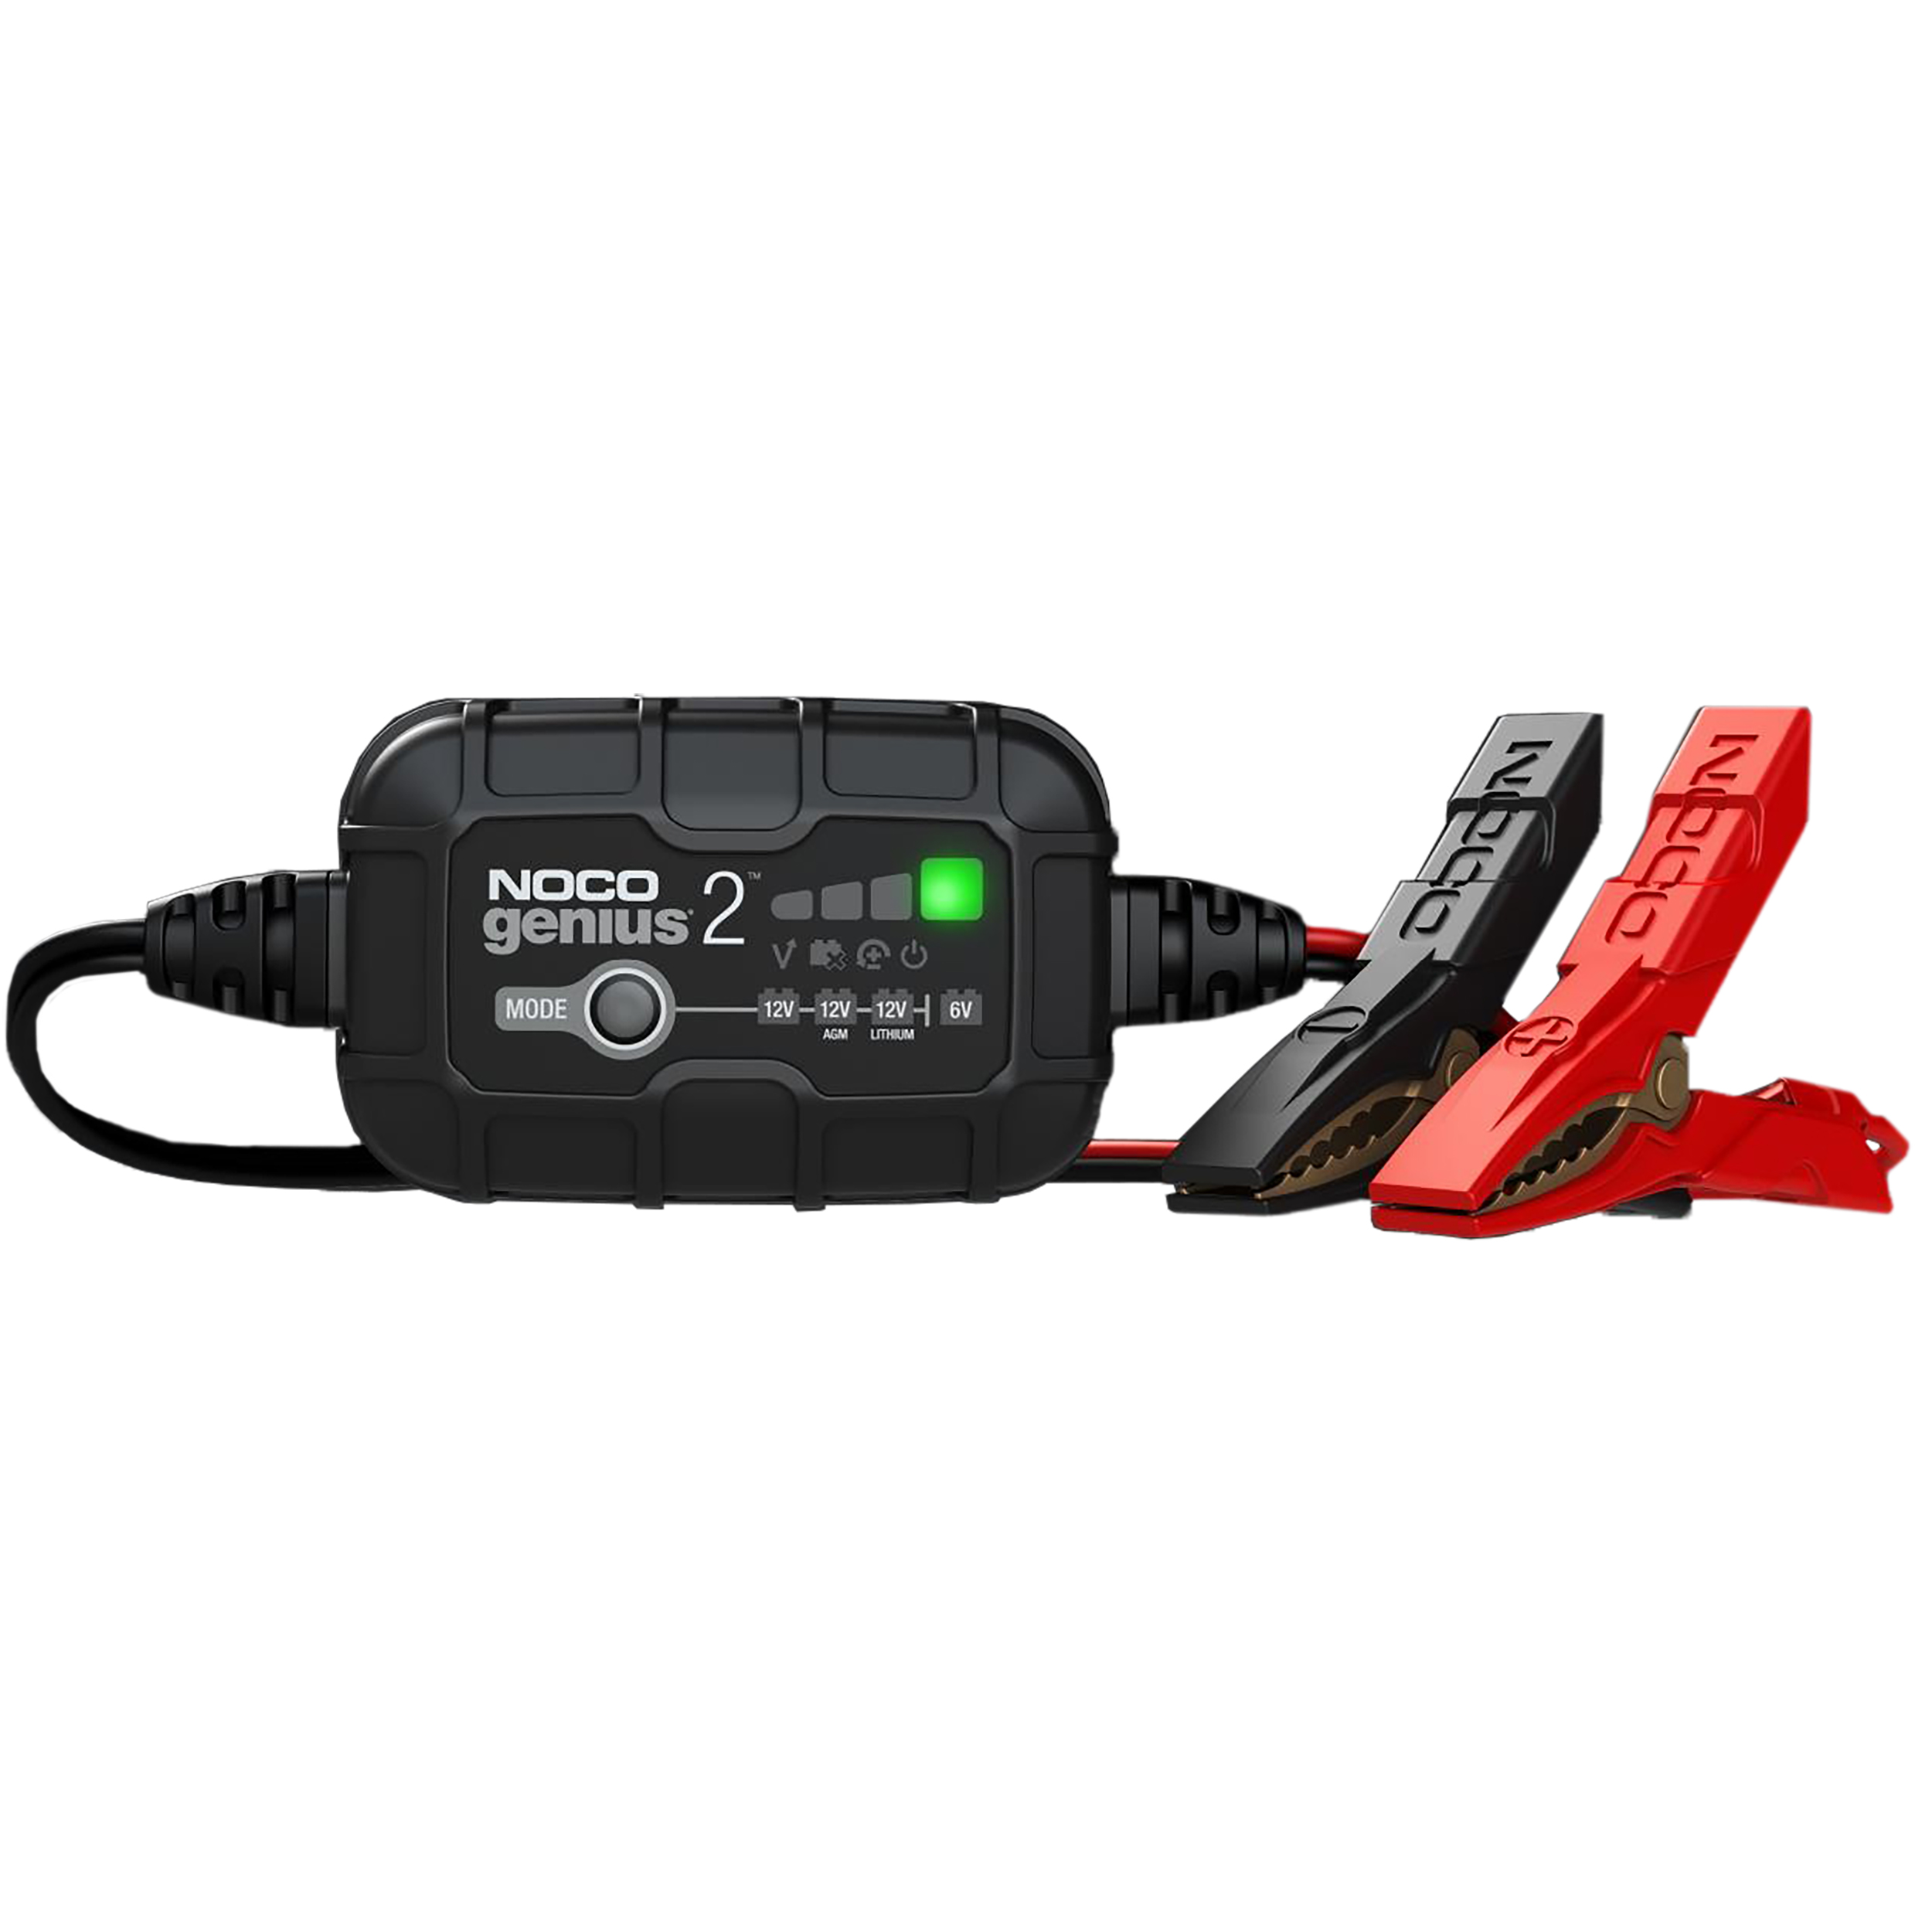 Noco G-1100 Motorcycle Battery Charger